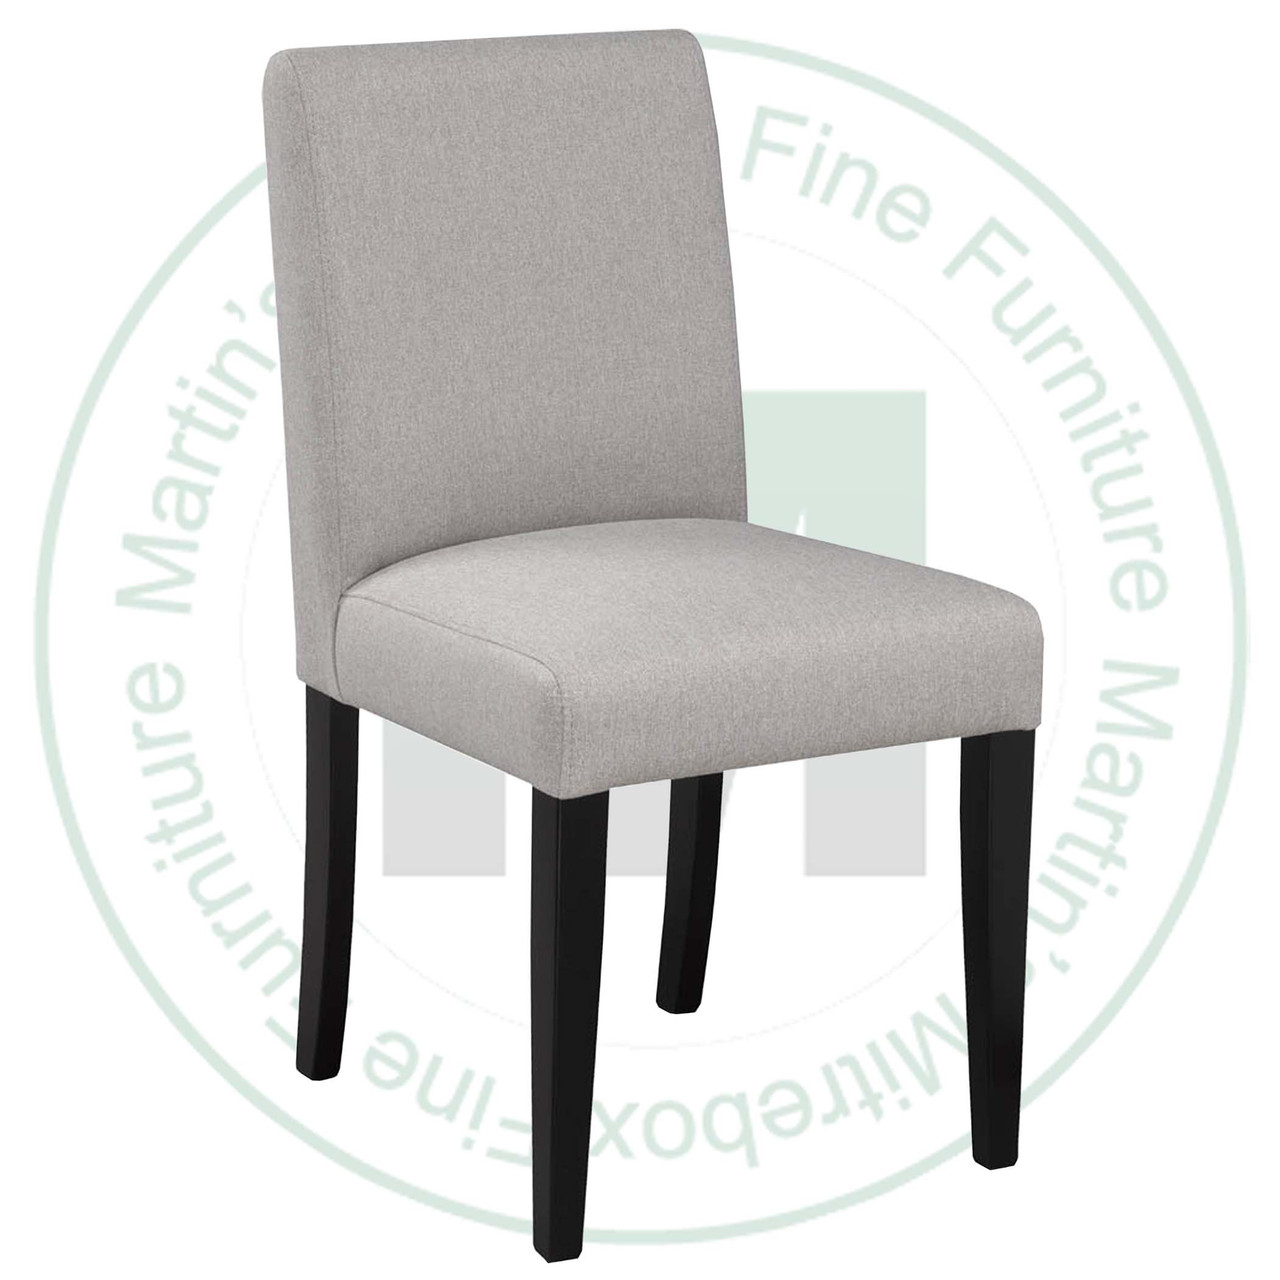 Oak Pori Side Chair With Leather Seat